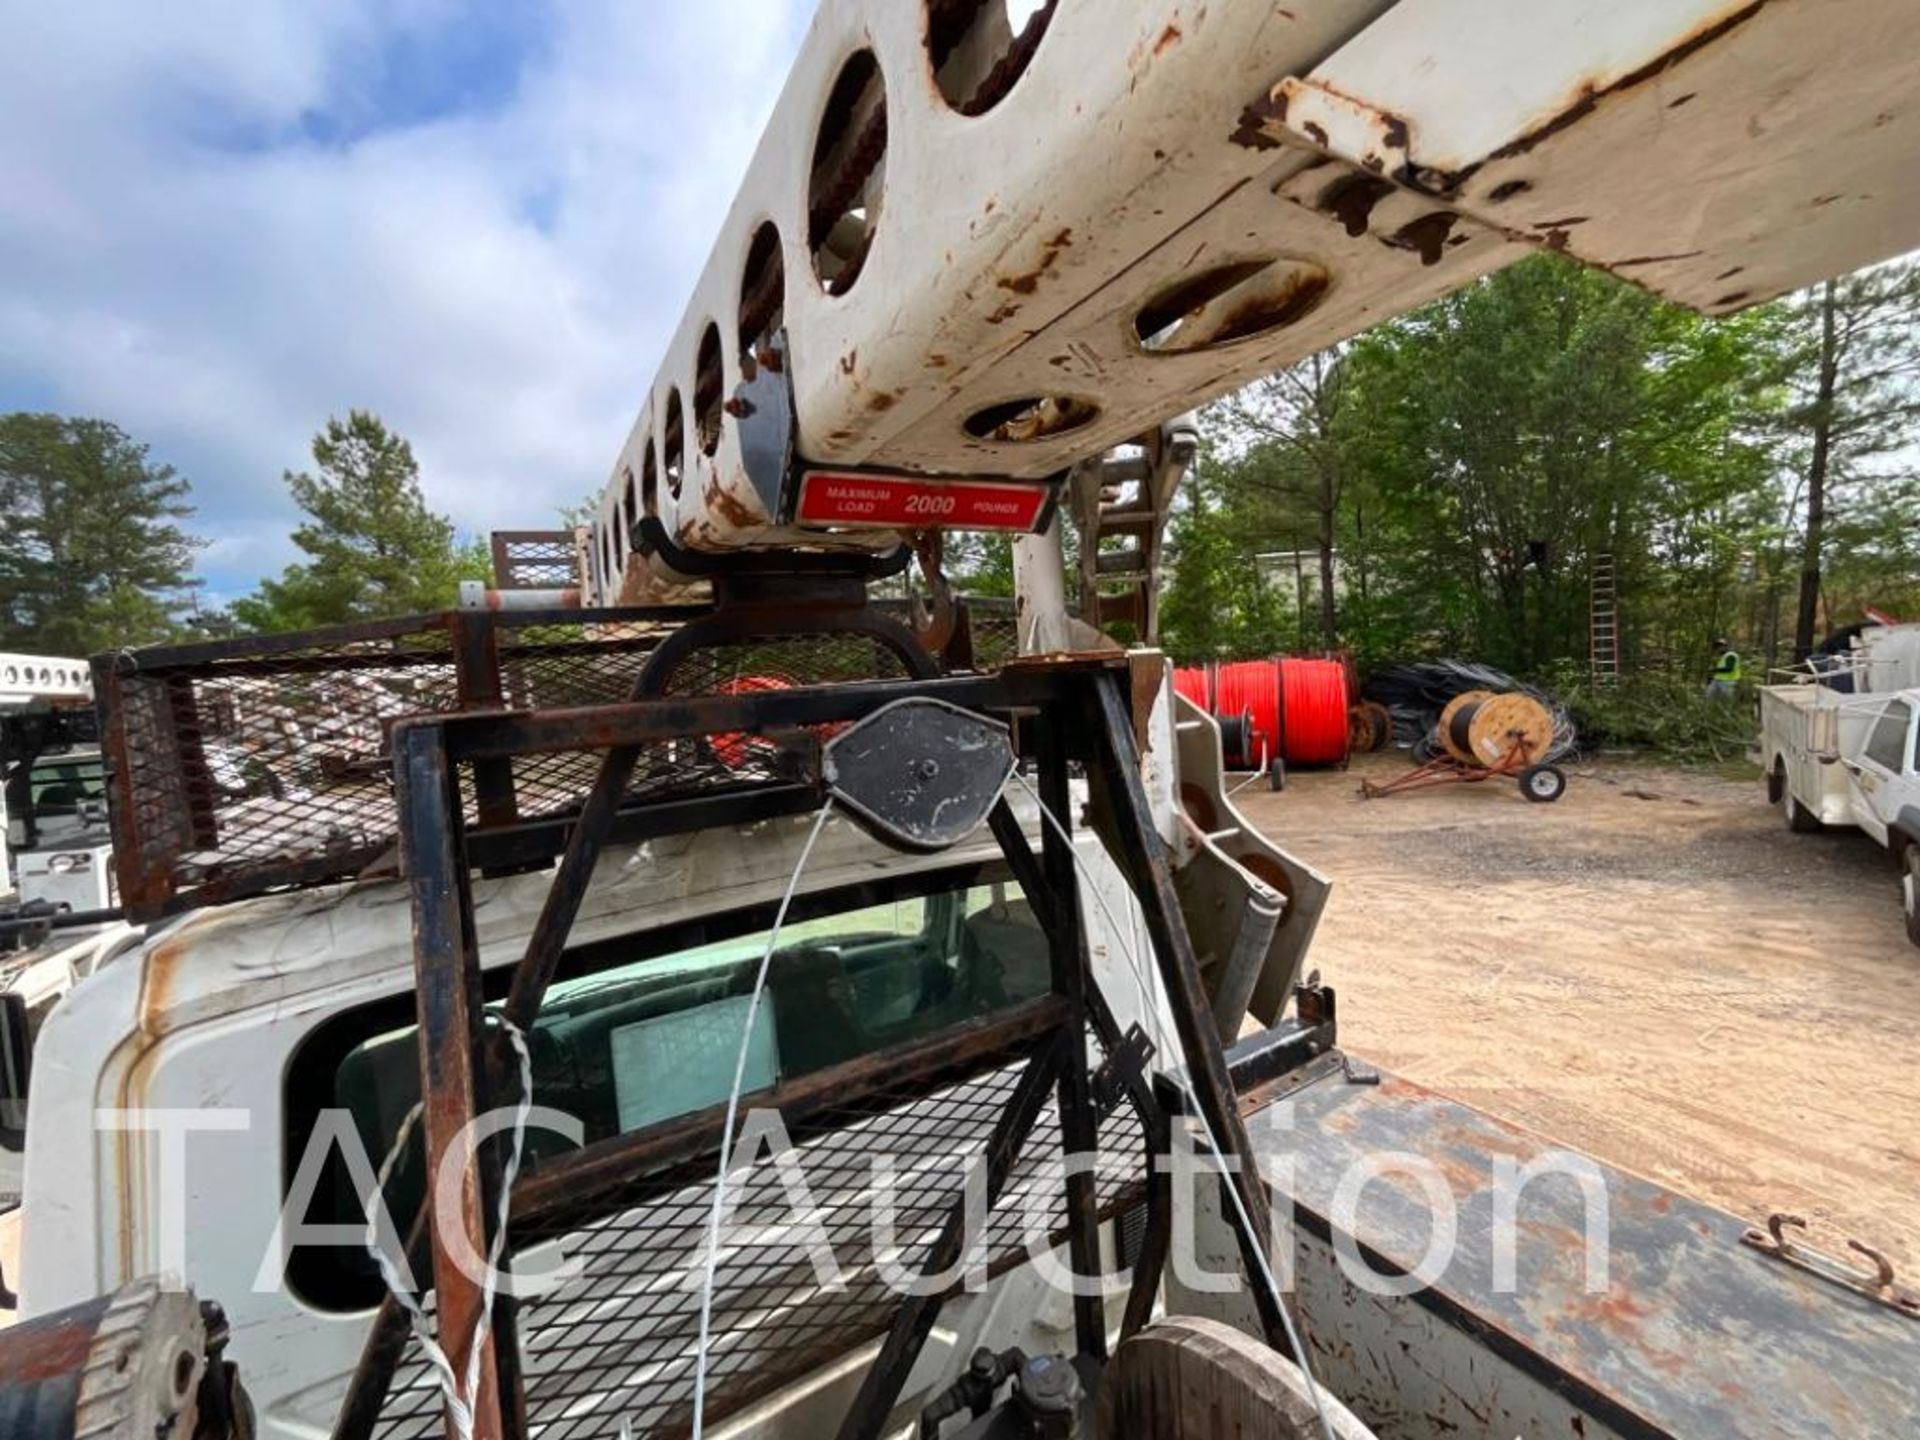 2006 International 4300 Cable Placer Bucket Truck - Image 36 of 64